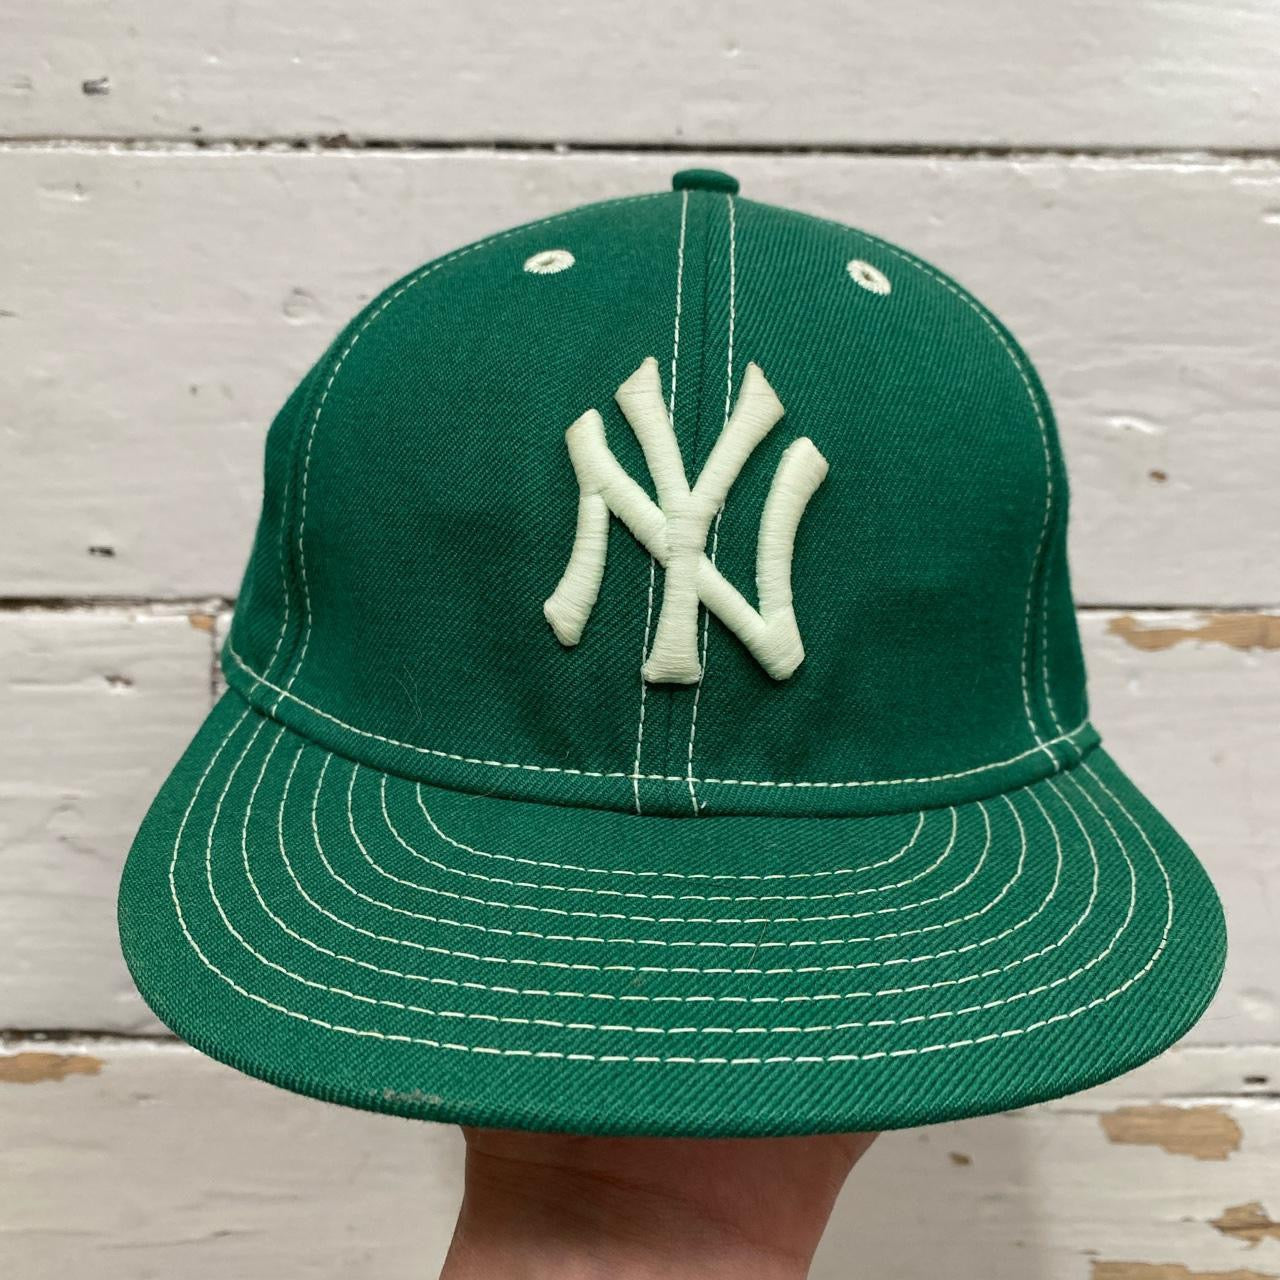 New Era New York Yankees Vintage Green Fitted Cap (7 1/8)